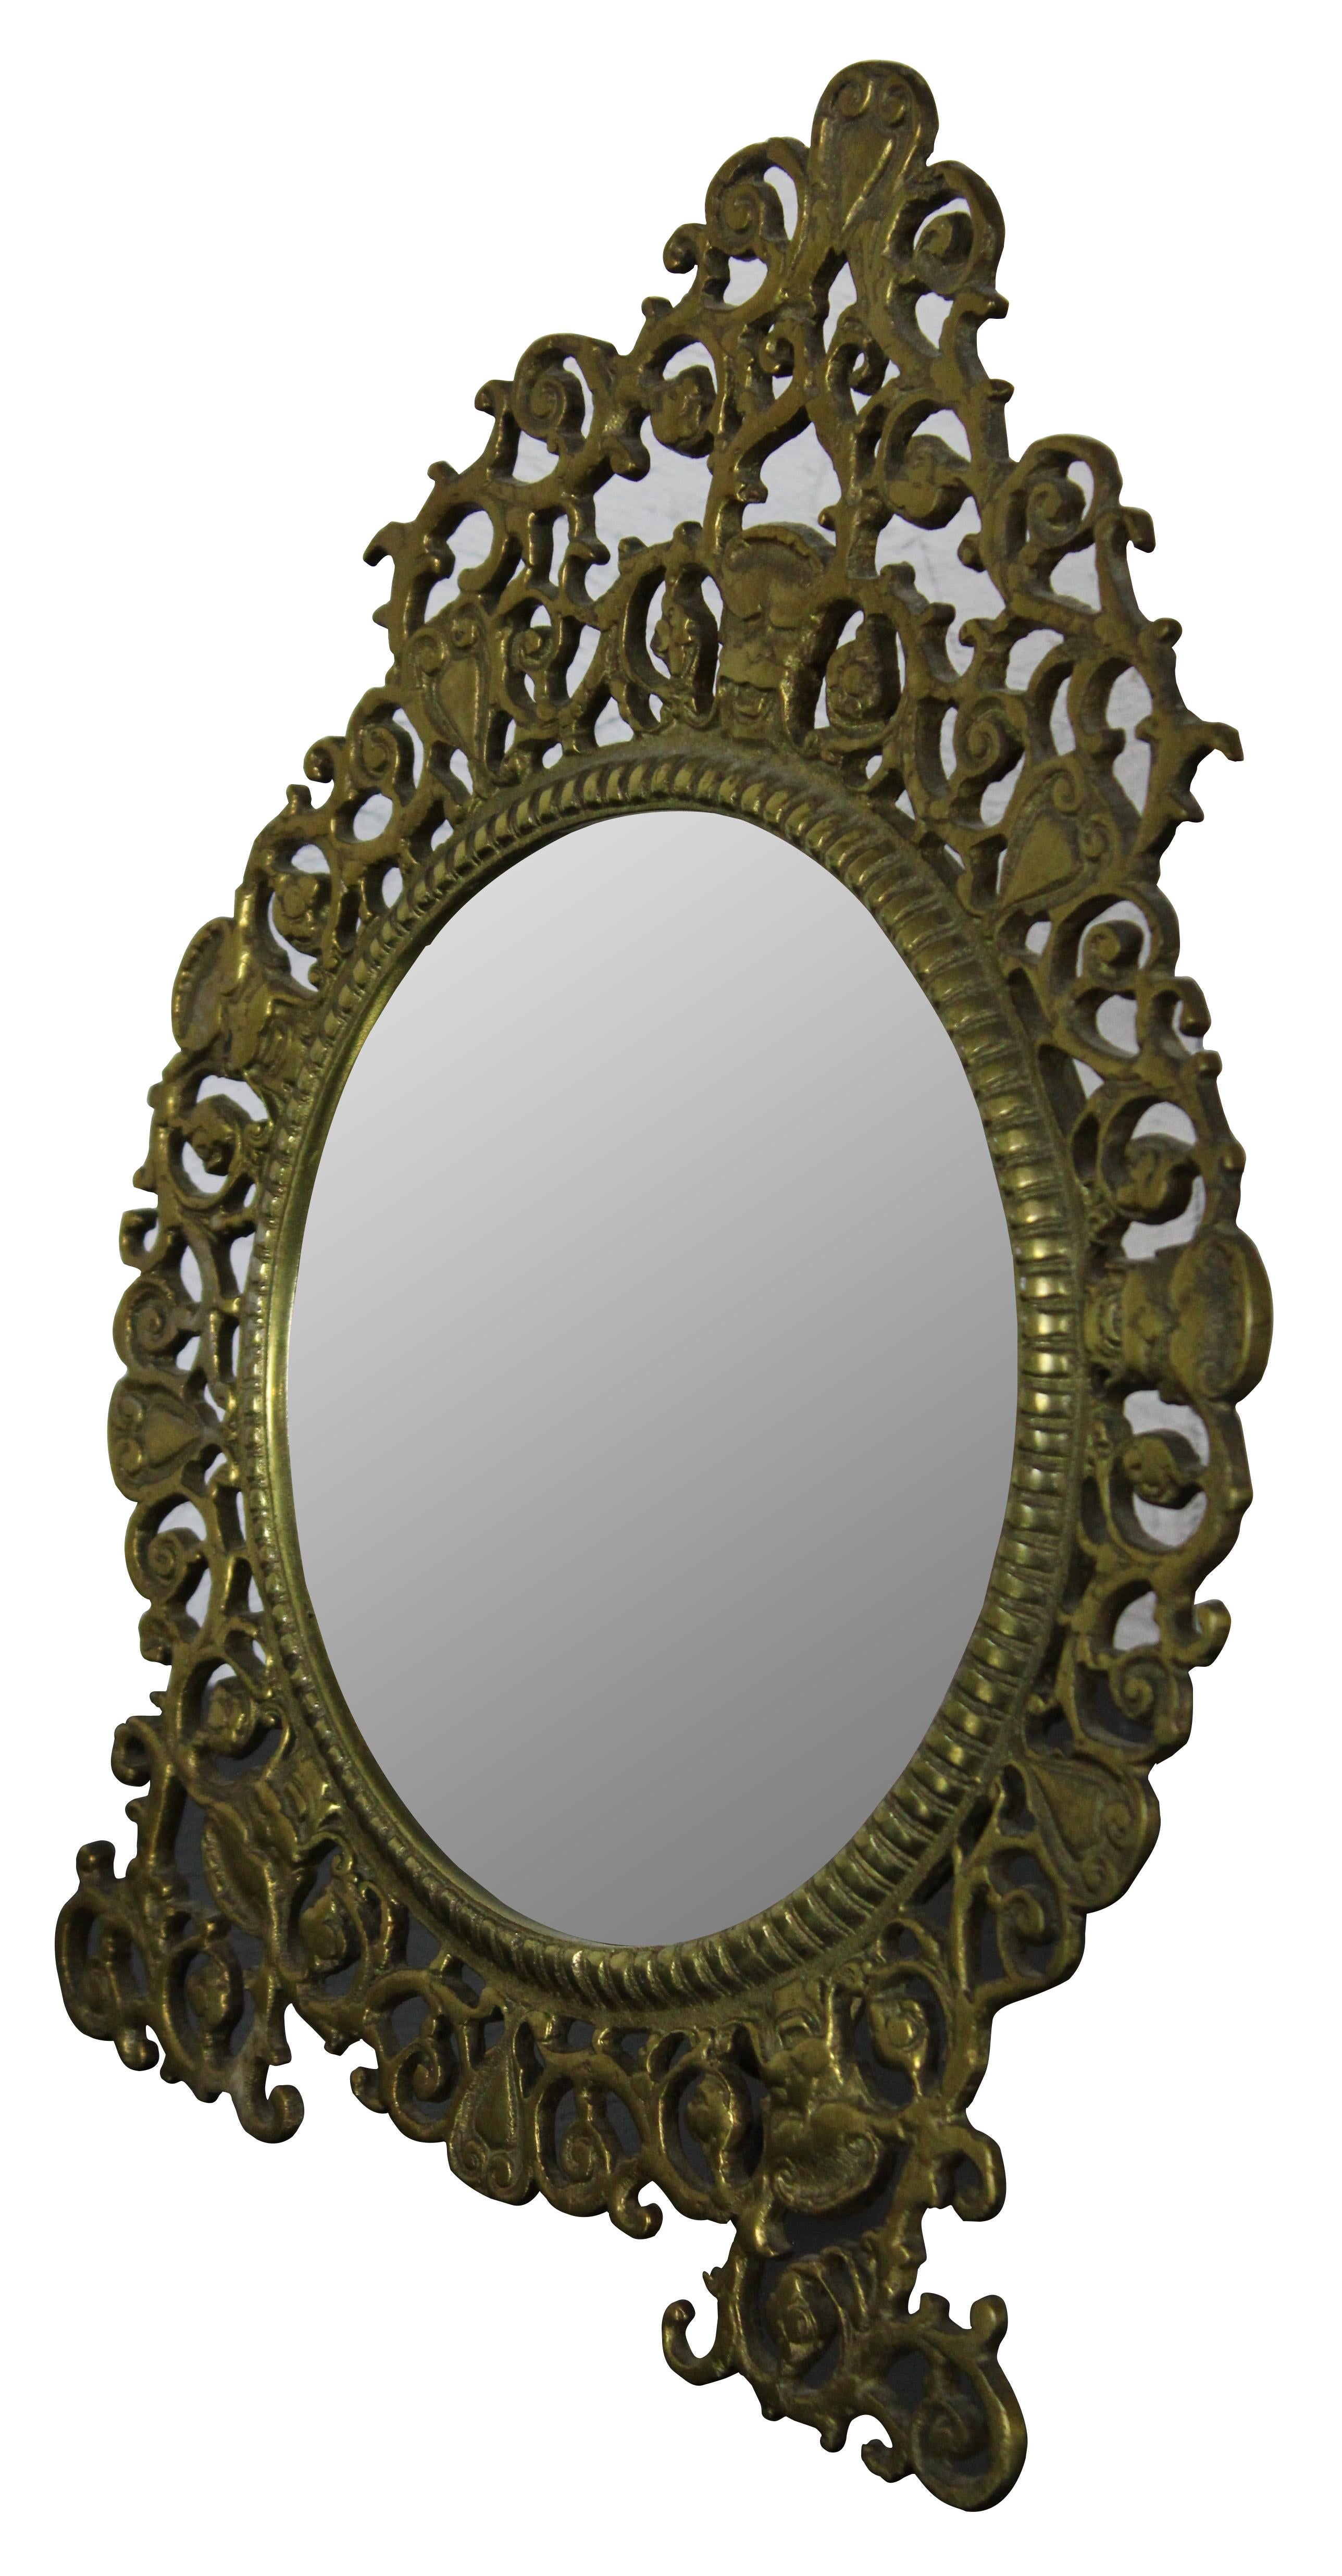 Vintage gilded brass vanity mirror by Virginia Metalcrafters with swirling baroque styling around a round mirror. Marked VM 14-1 on reverse.

Measures: 9.5” x 4” x 12.25” / Mirror - 6.25” x 6.25” (Width x Depth x Height).